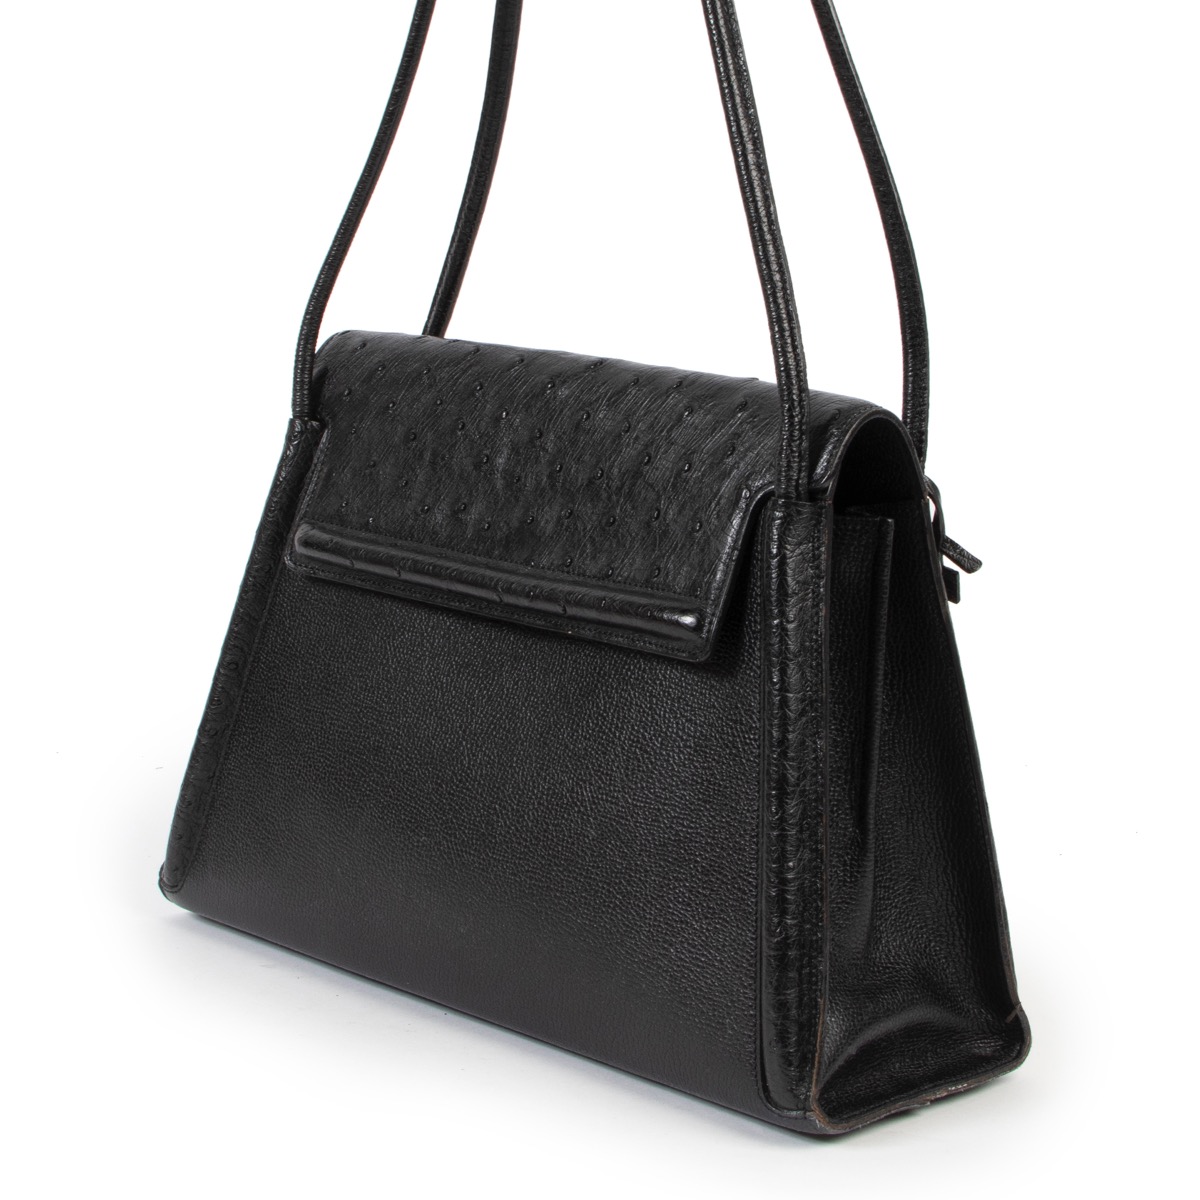 Vintage bags by anneke - Delvaux Black Charme Shoulder Bag Ostrich Leather  with black leather. This special bag totally fits its name! This Delvaux  bag is crafted in beautiful black and ostrich